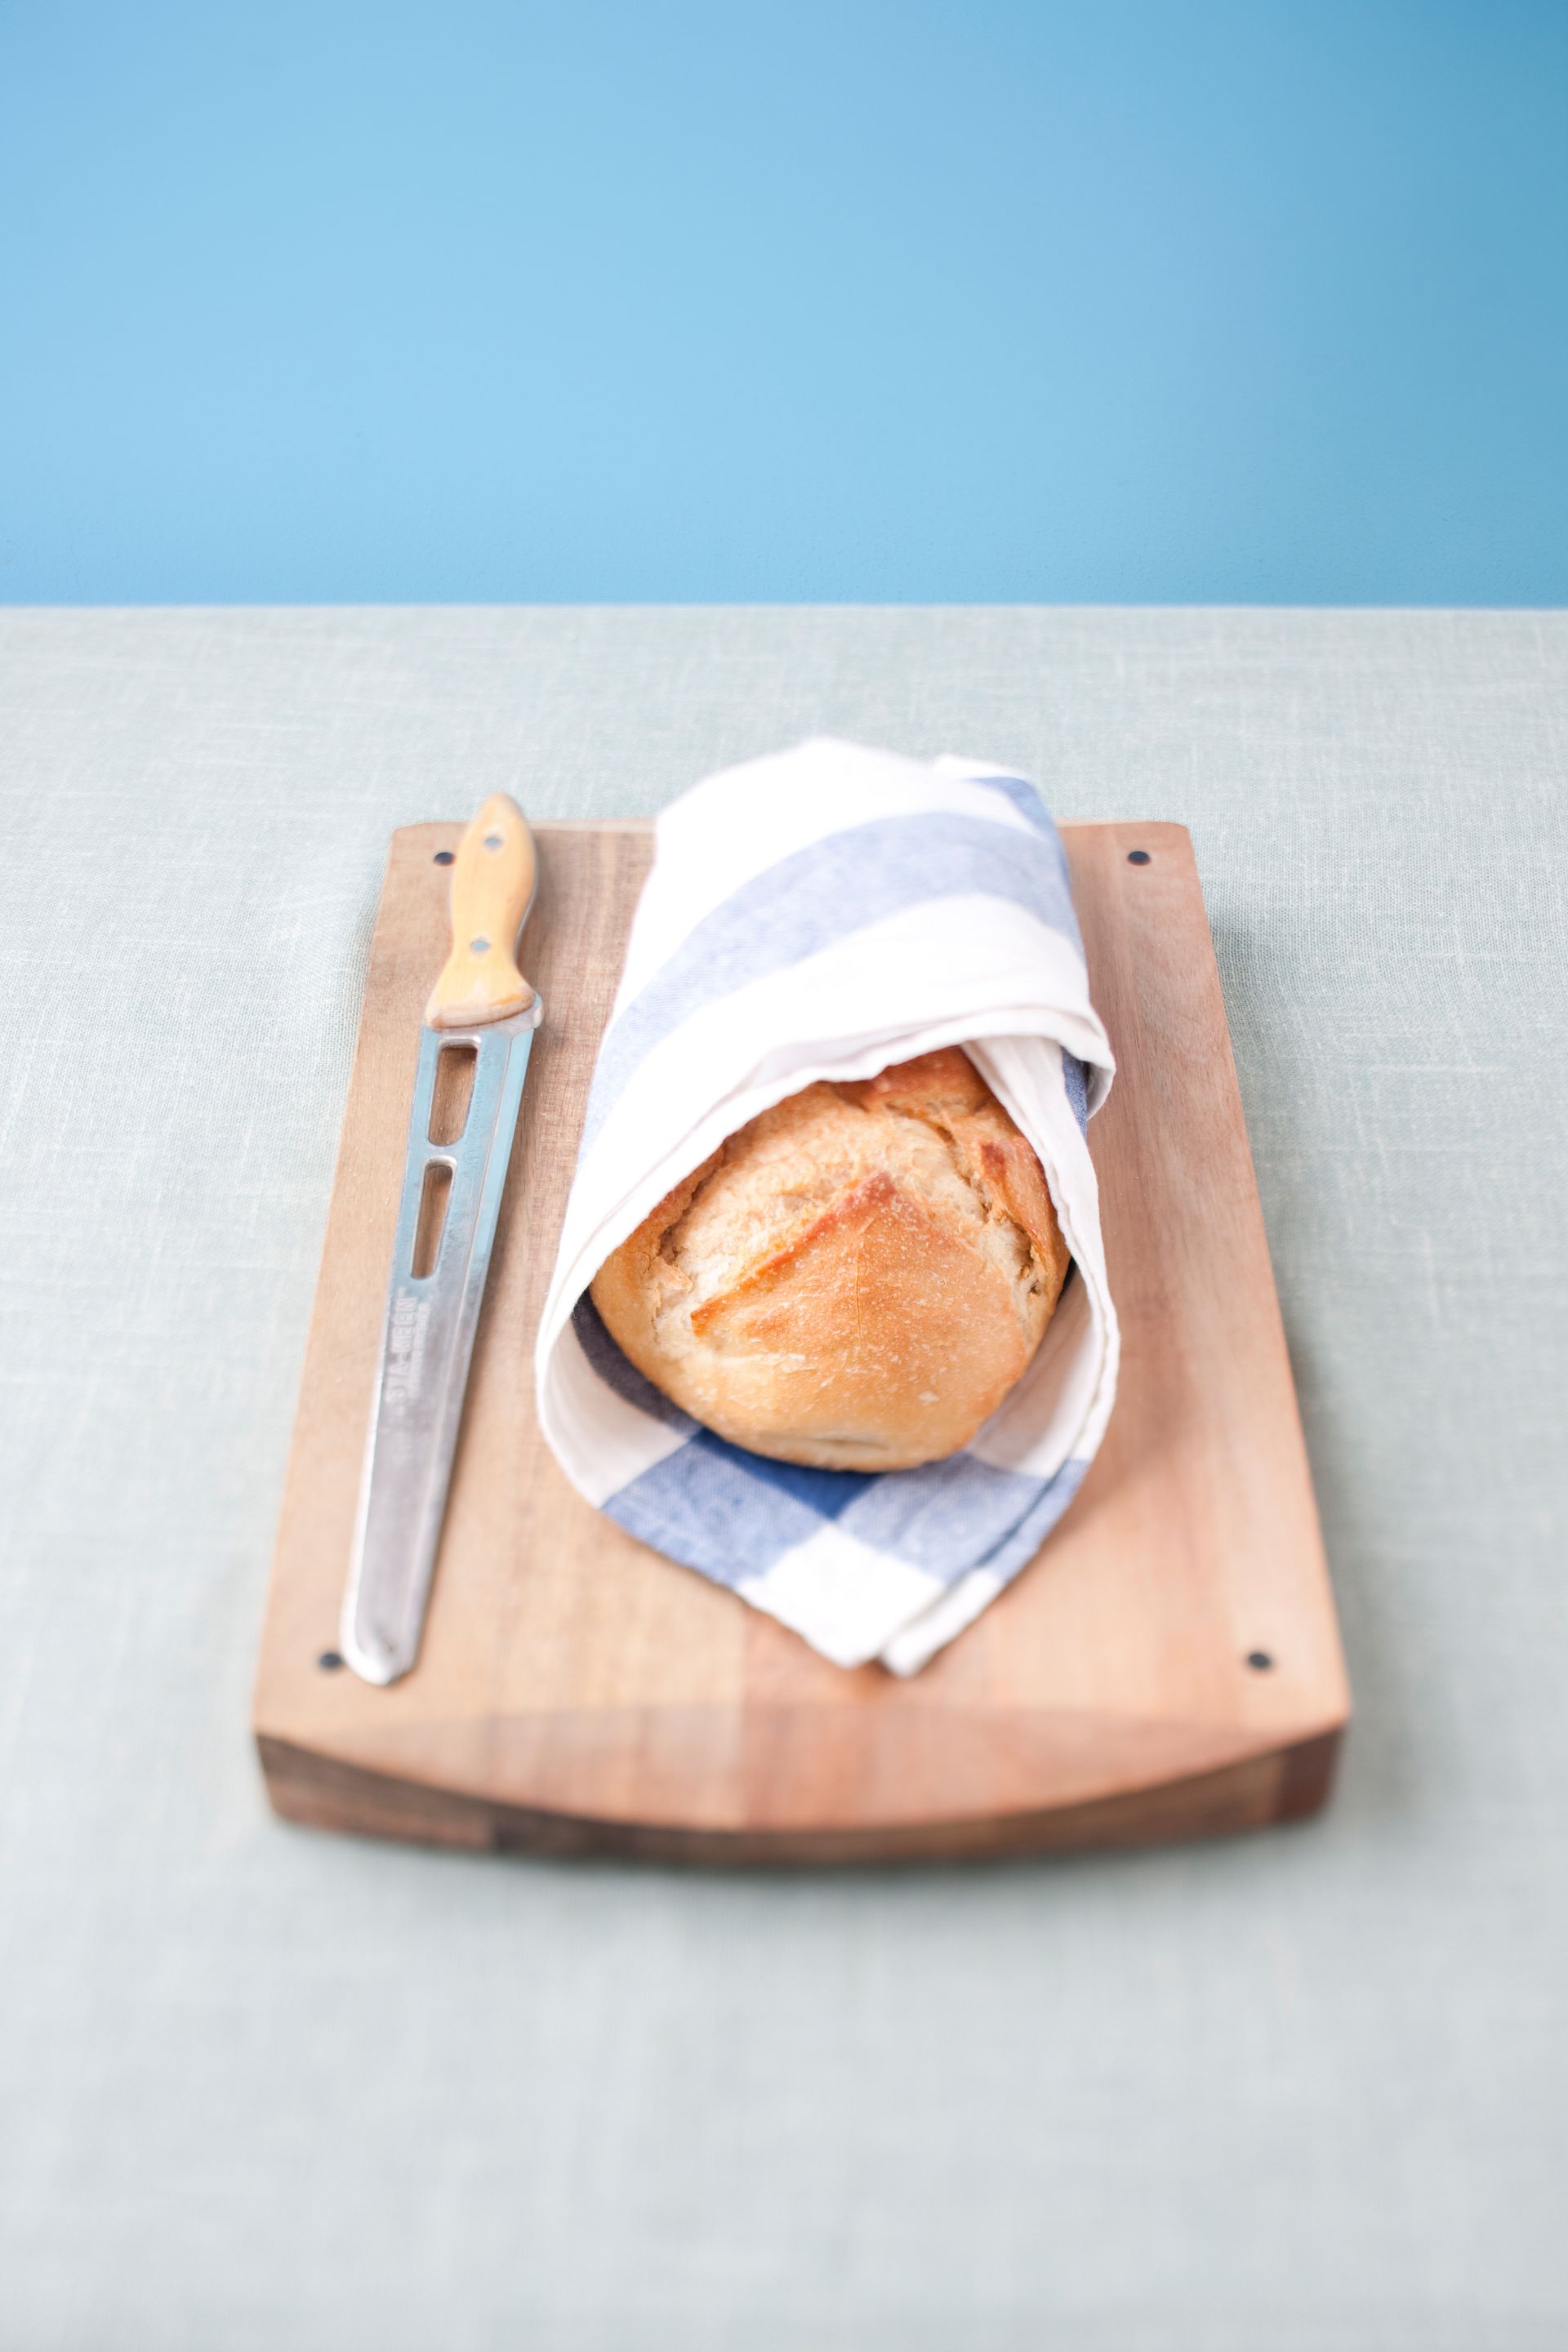 A loaf of bread wrapped in a towel on a cutting board.